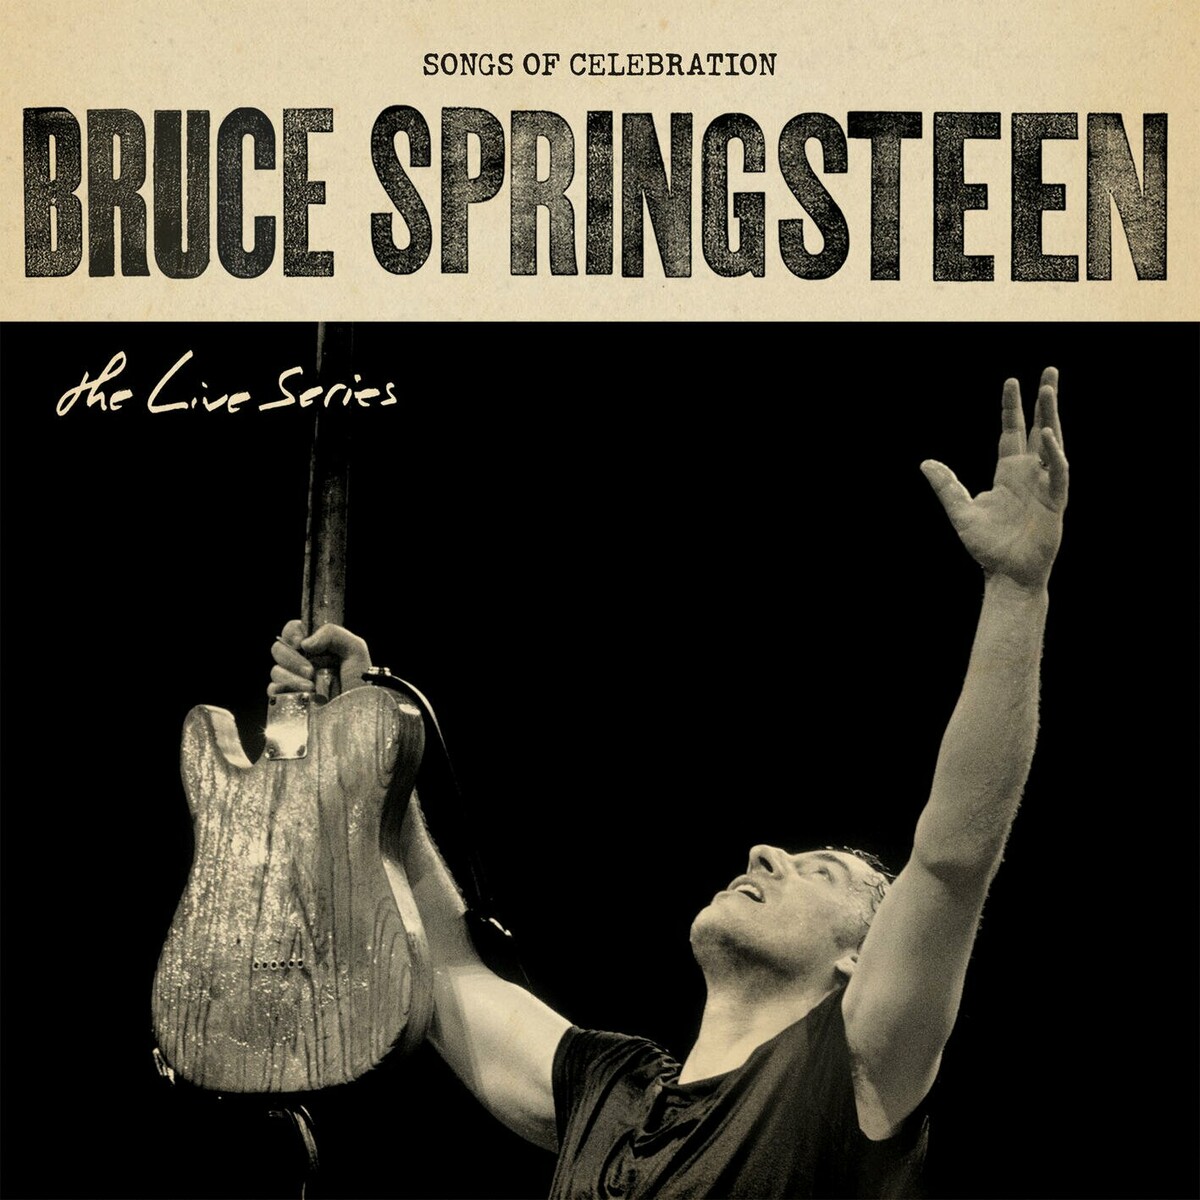 Bruce Springsteen - The Live Series Songs Of Celebration